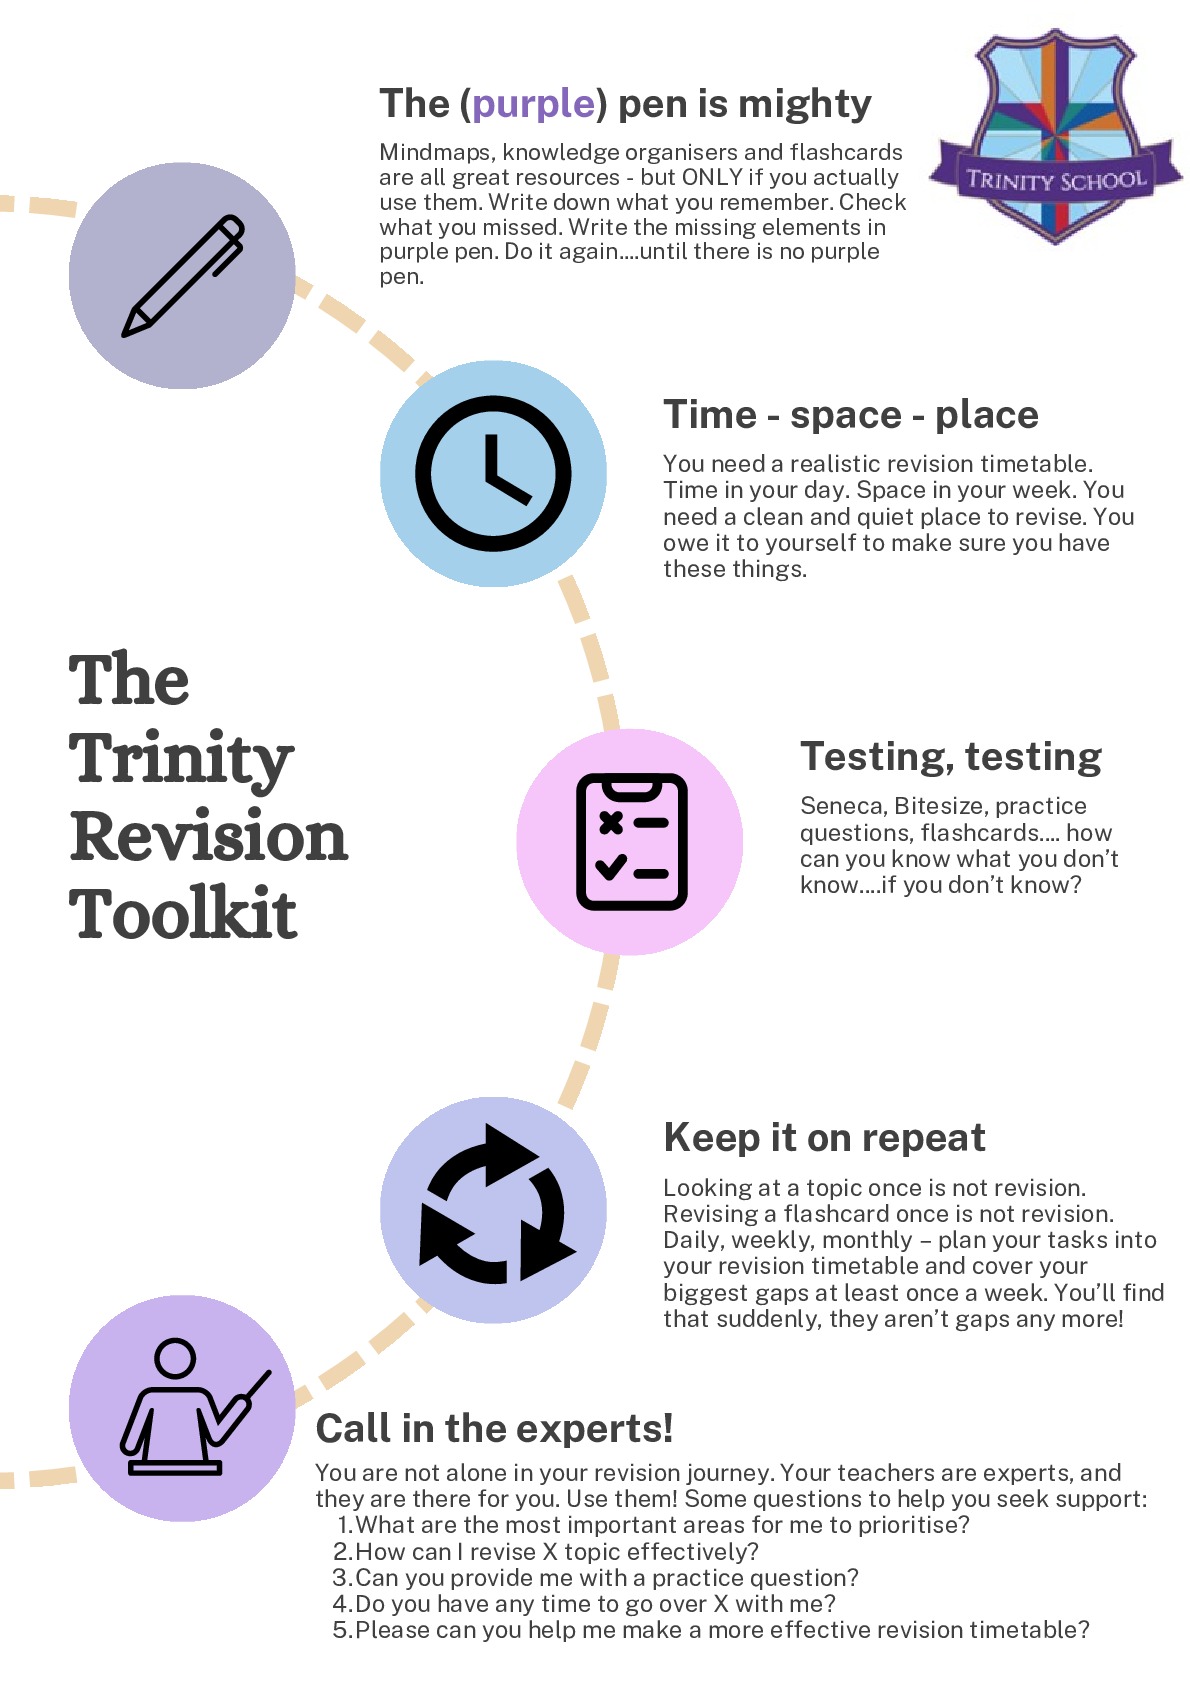 Even newer revision toolkit